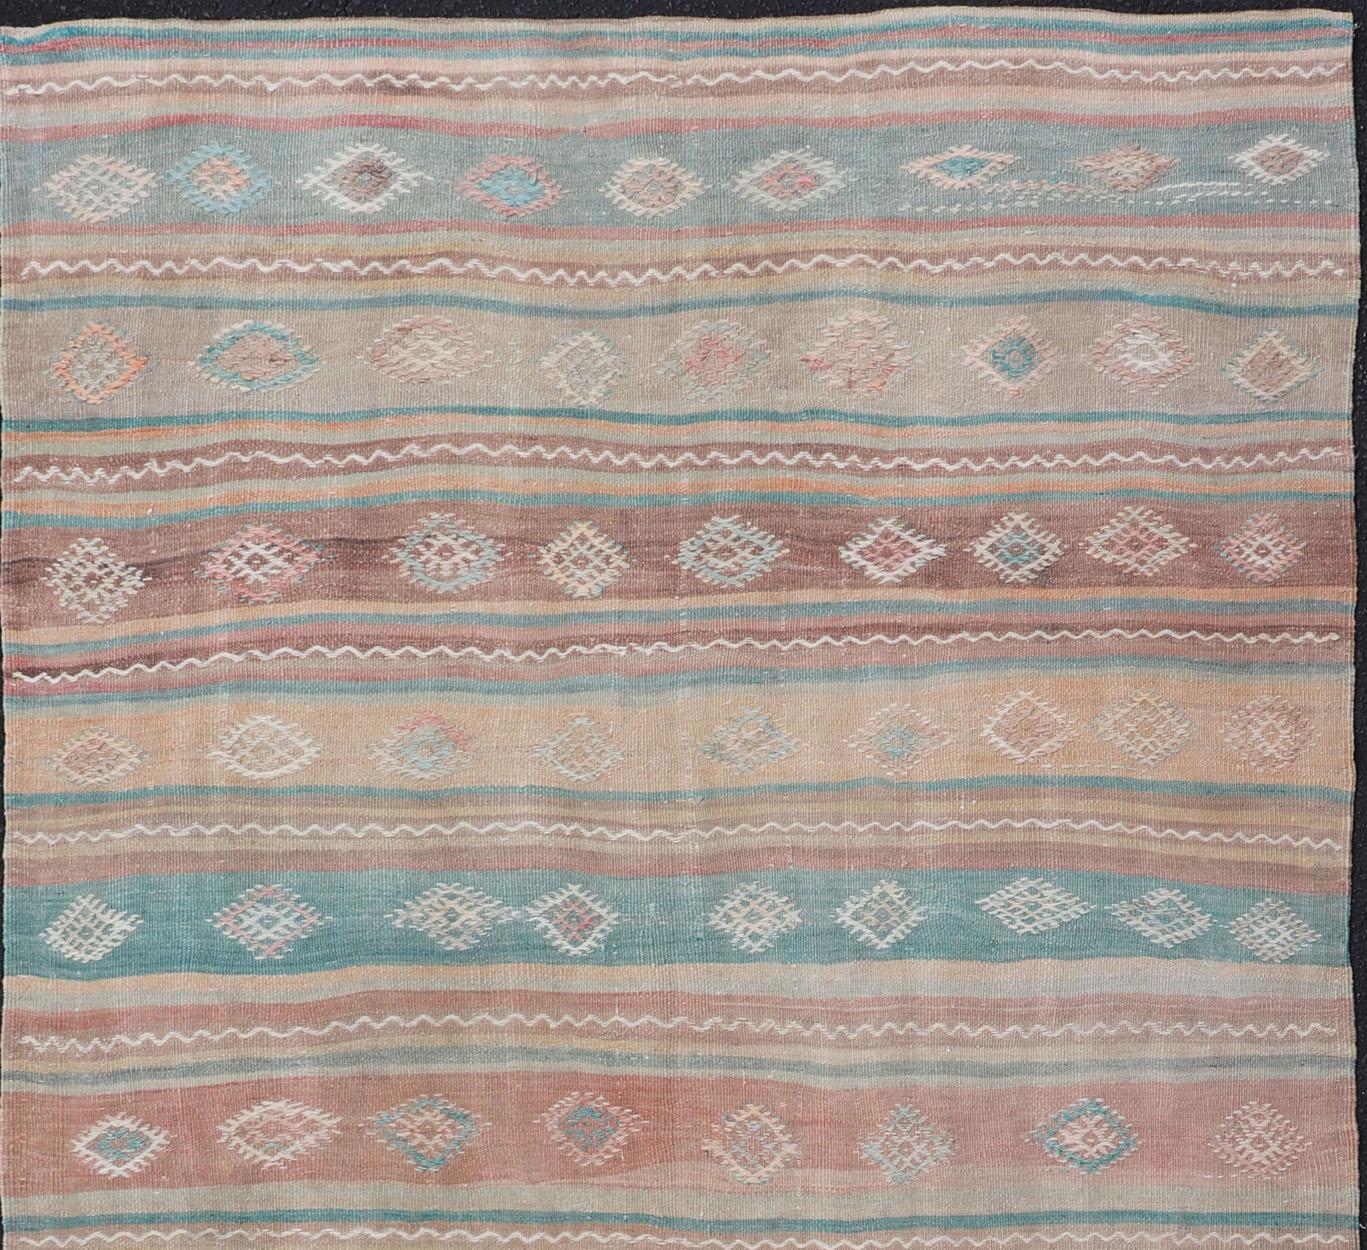 Vintage Long Colorful Kilim Gallery Rug with Stripe Design in Soft Colors In Excellent Condition For Sale In Atlanta, GA